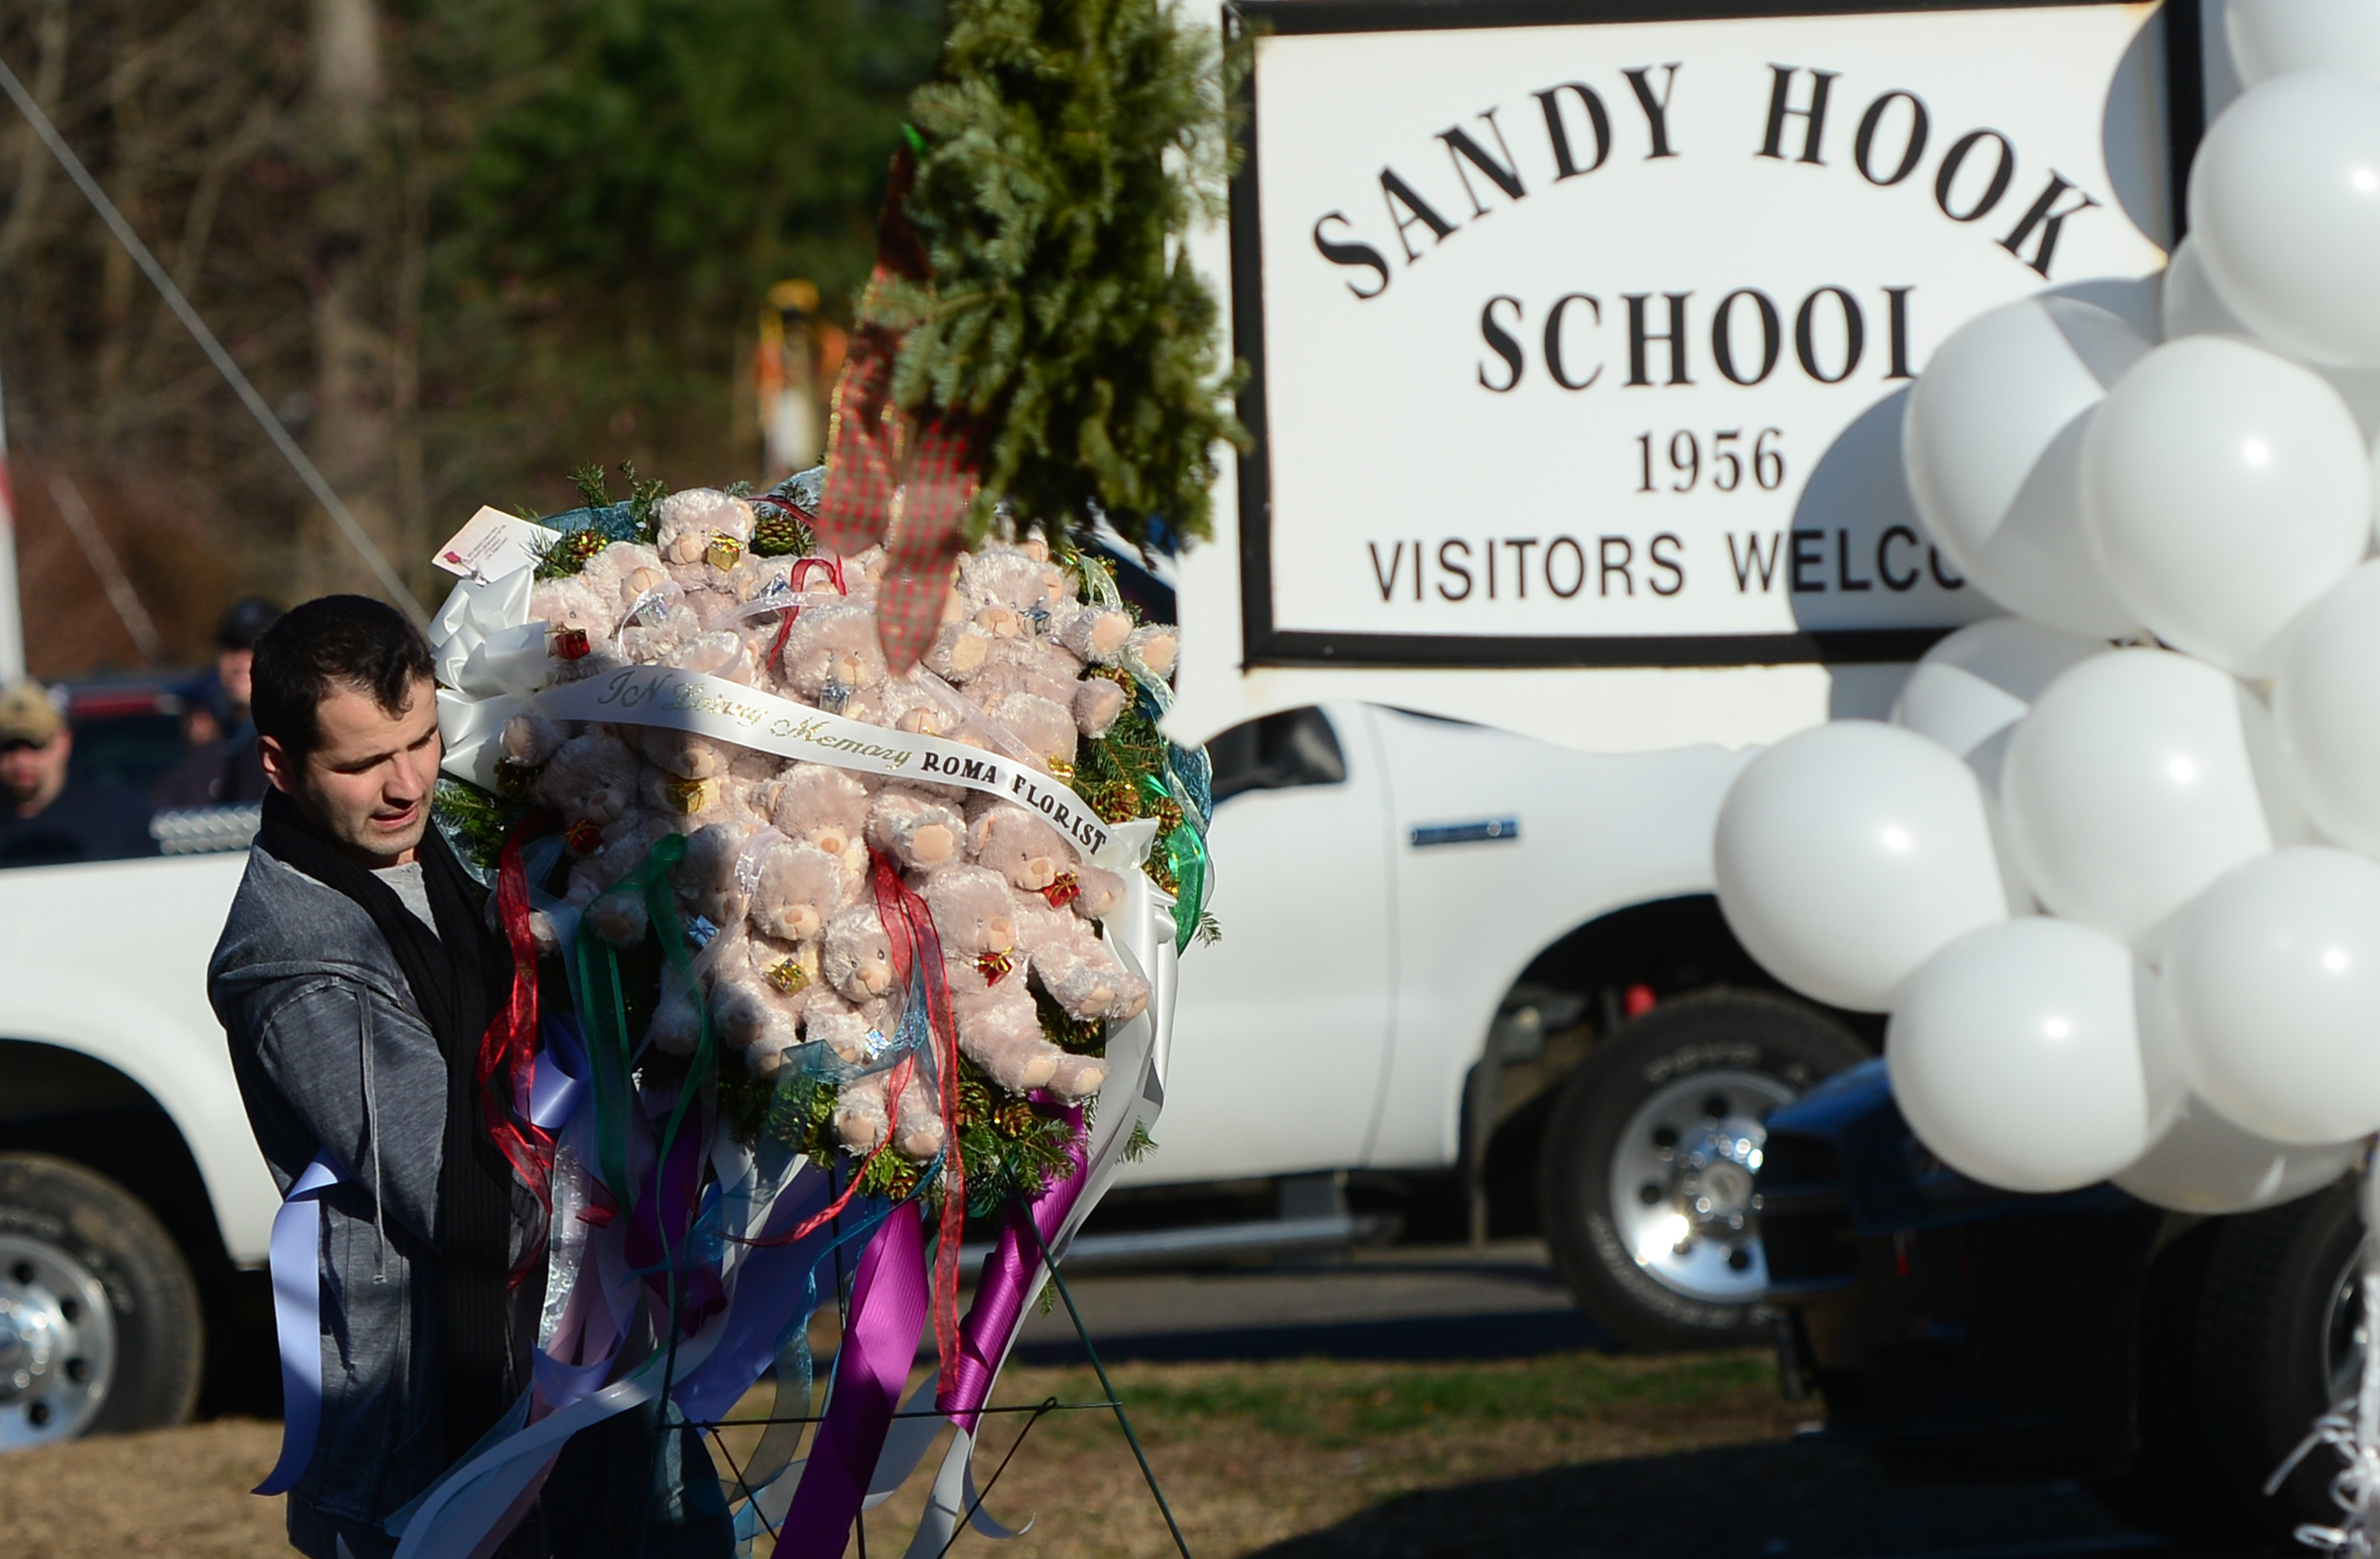 A man pays tribute to the victims of an elementary school shooting in Newtown, Connecticut, on December 15, 2012. (EMMANUEL DUNAND&mdash;AFP/Getty Images)